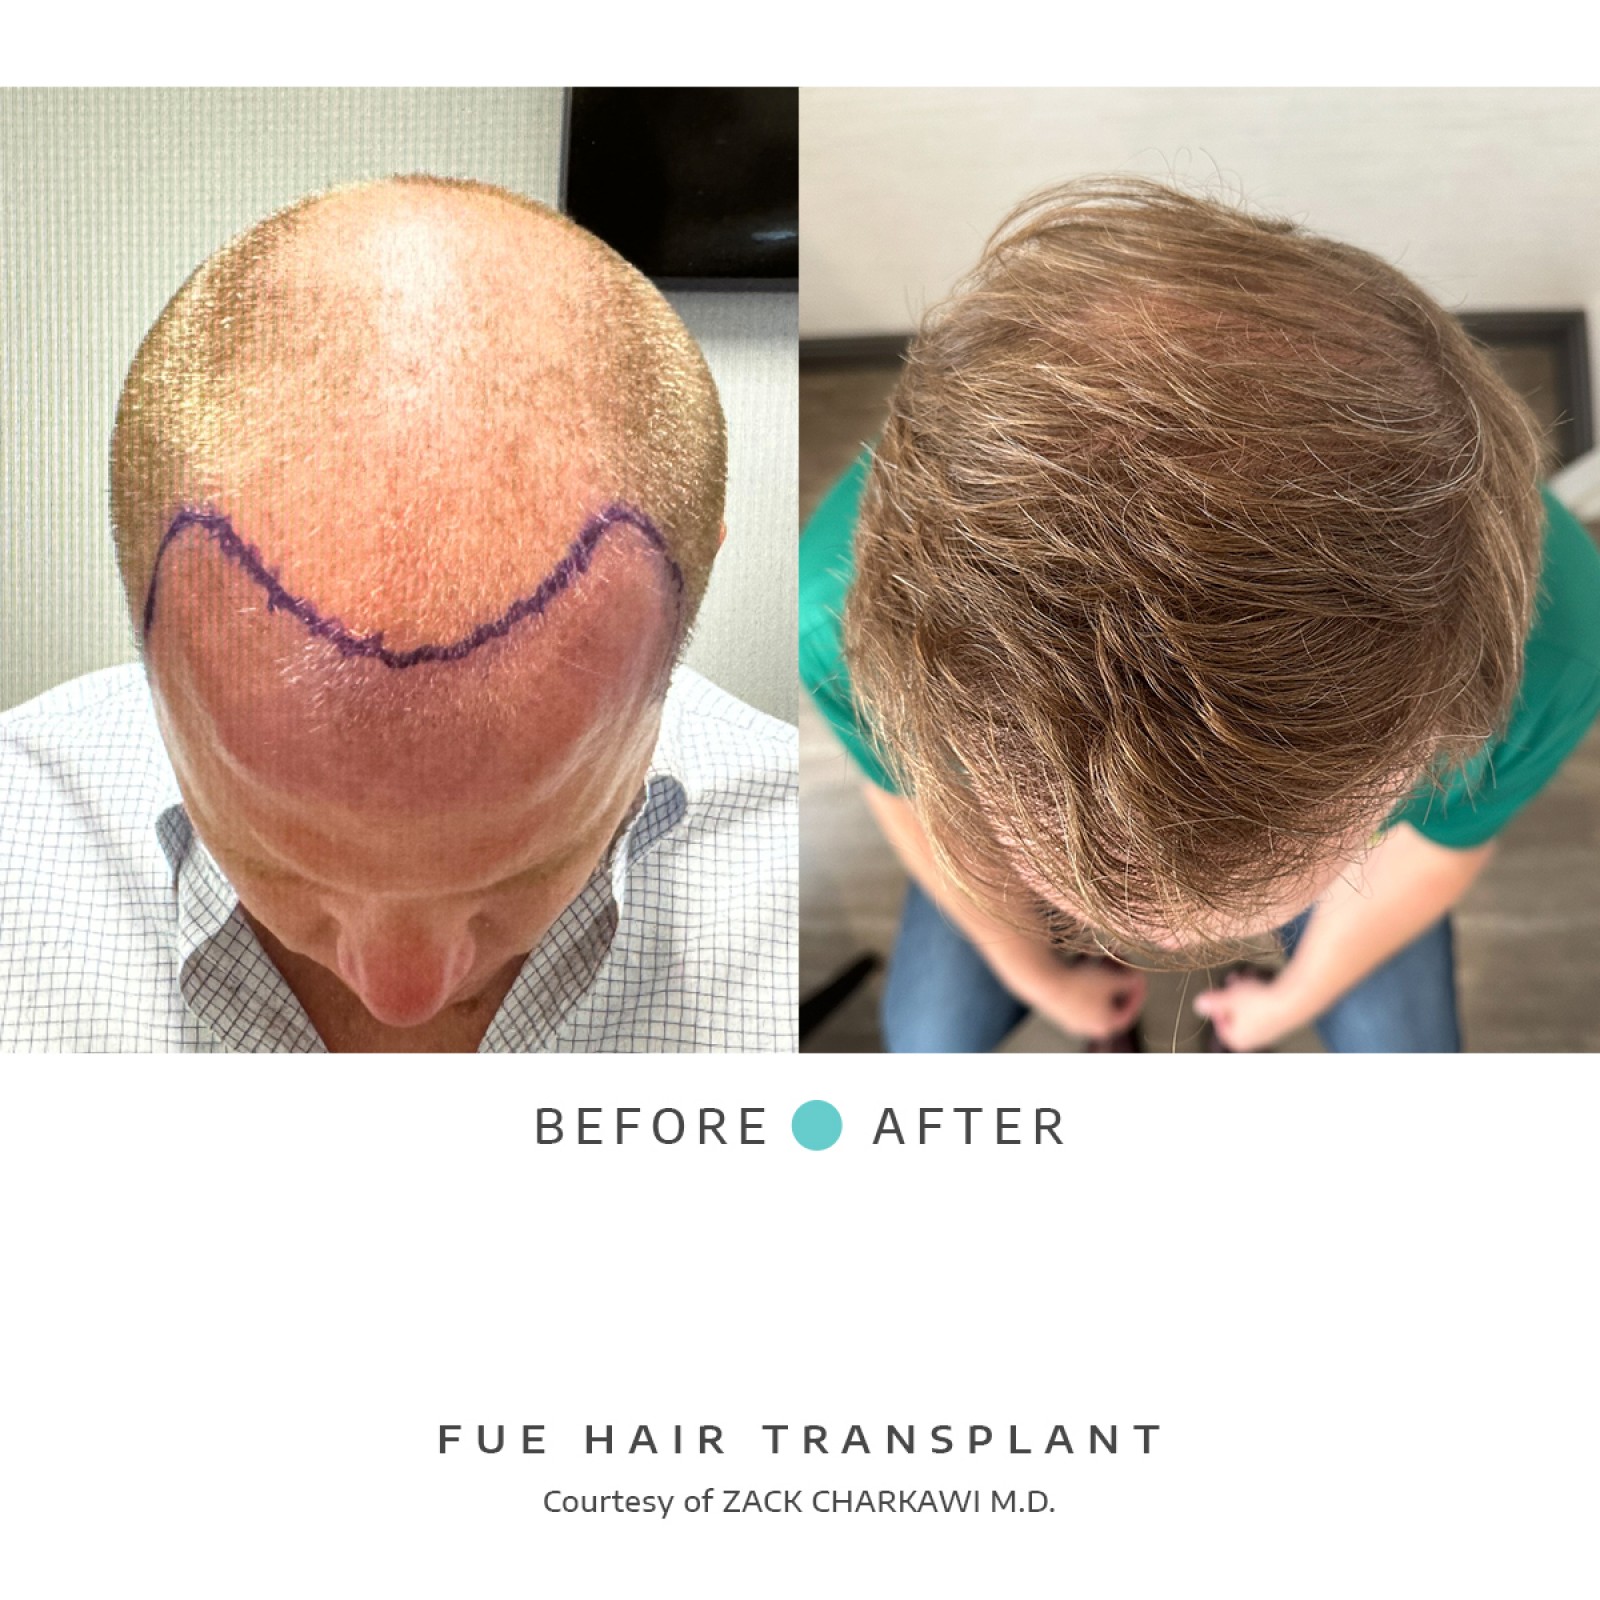 The before image shows balding and thinning hair with visible scalp patches. The after image shows a successful hair transplant with the scalp now covered in dense, natural-looking hair.